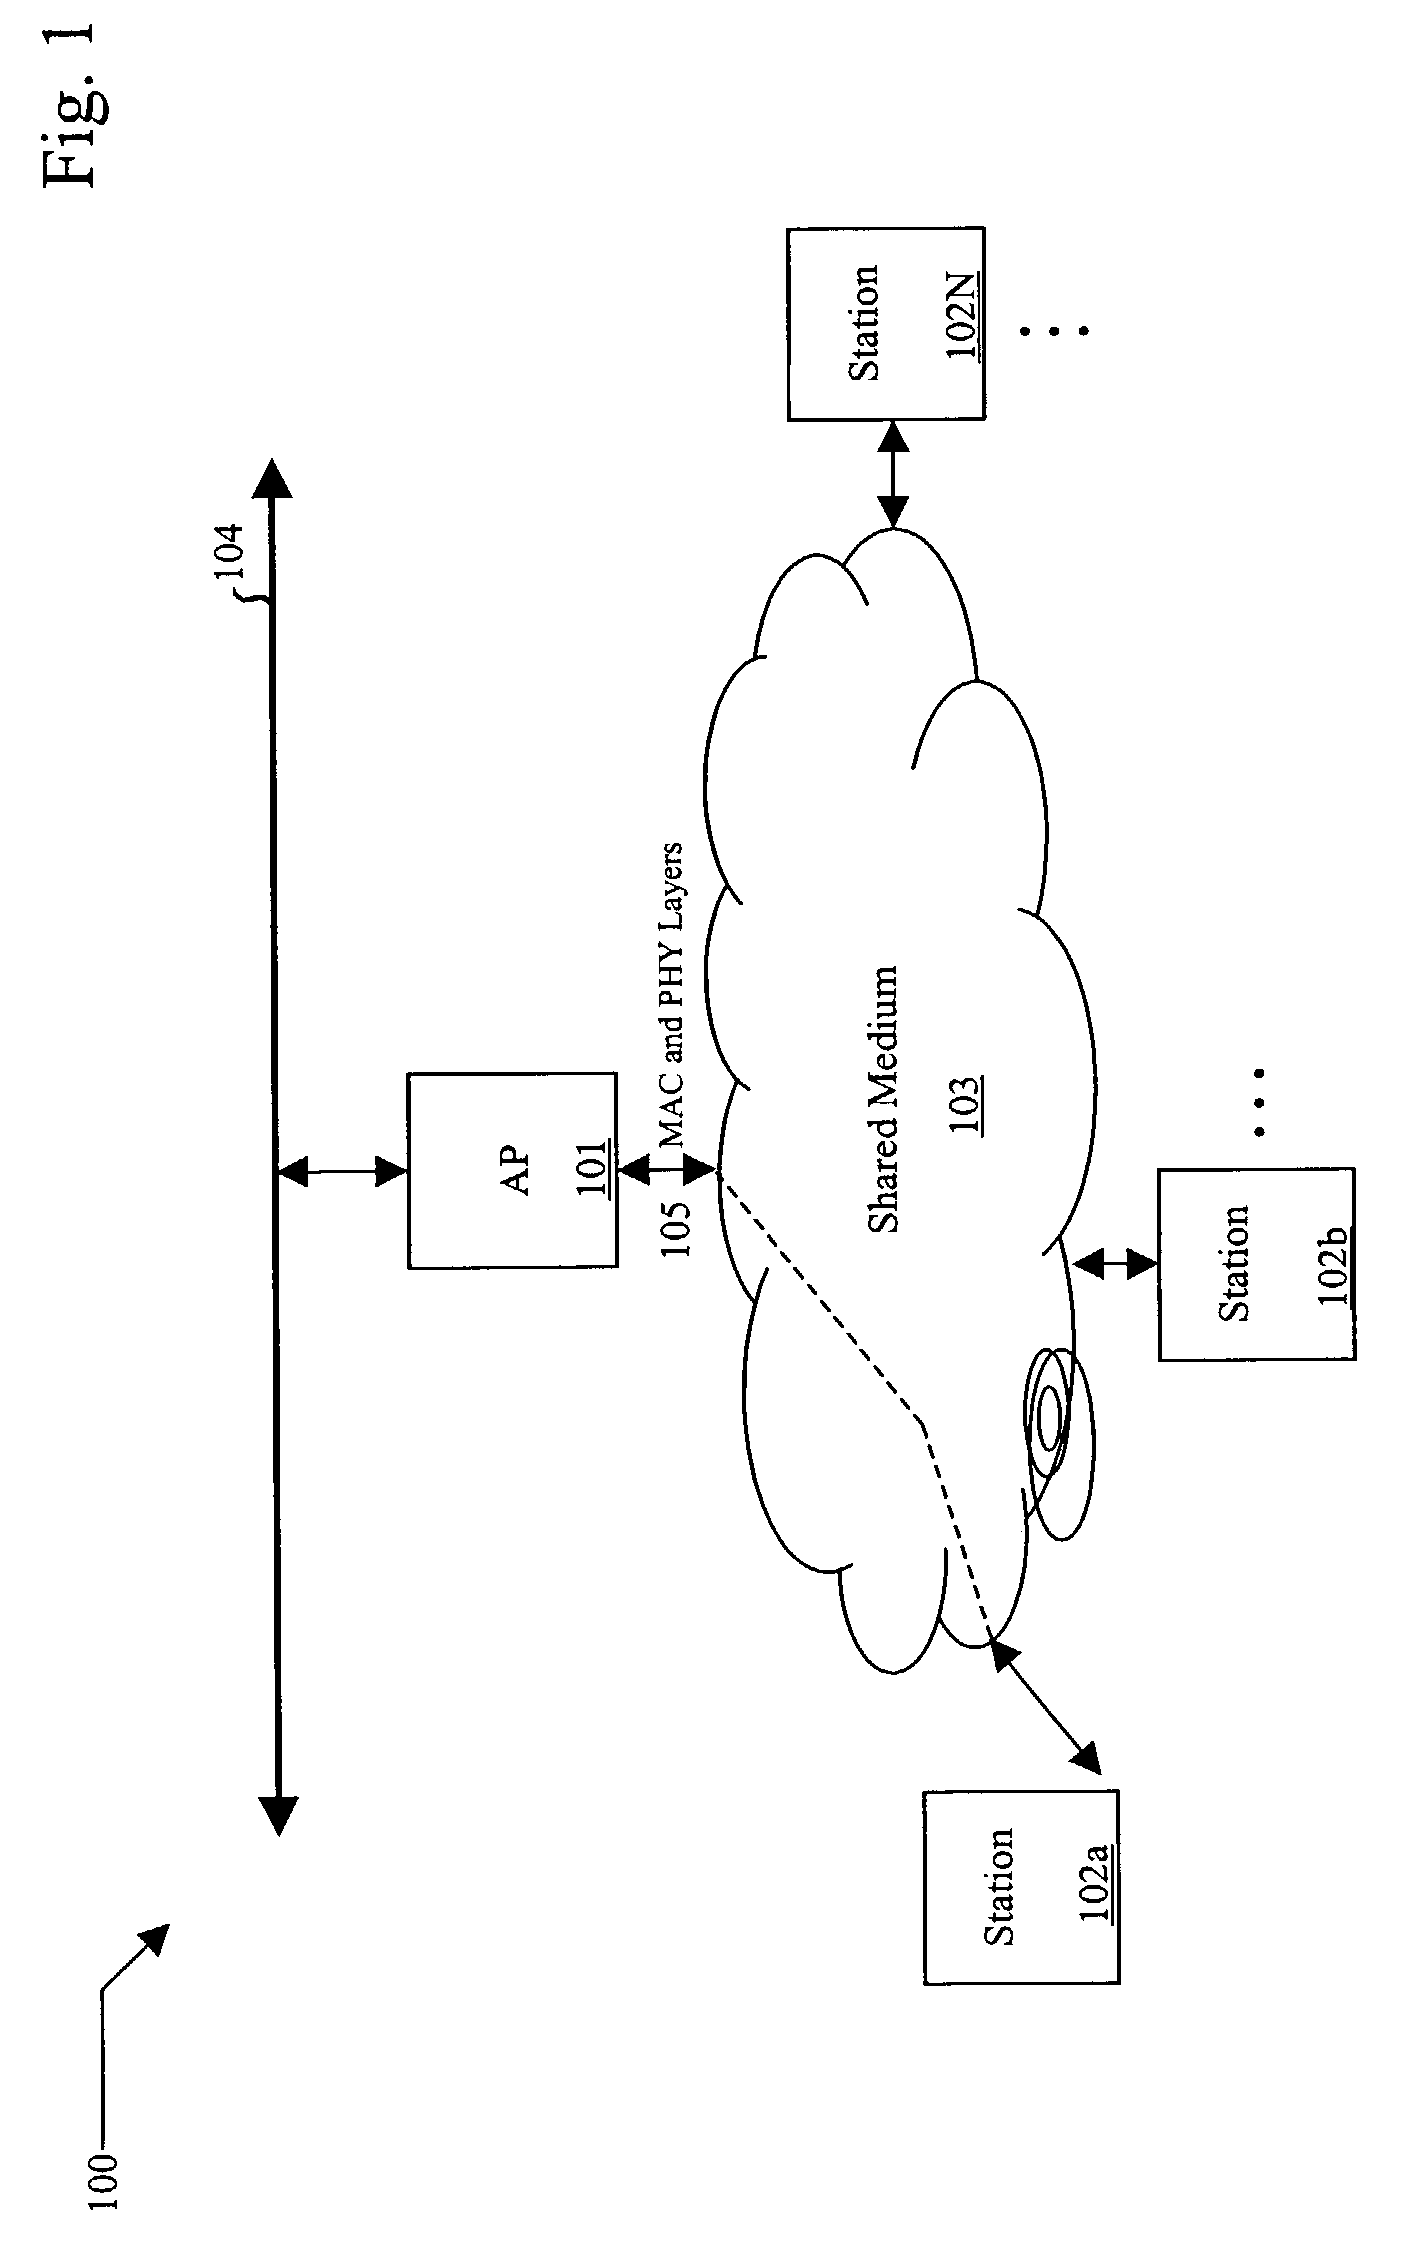 Data structures with amortized control overhead and methods and networks using the same